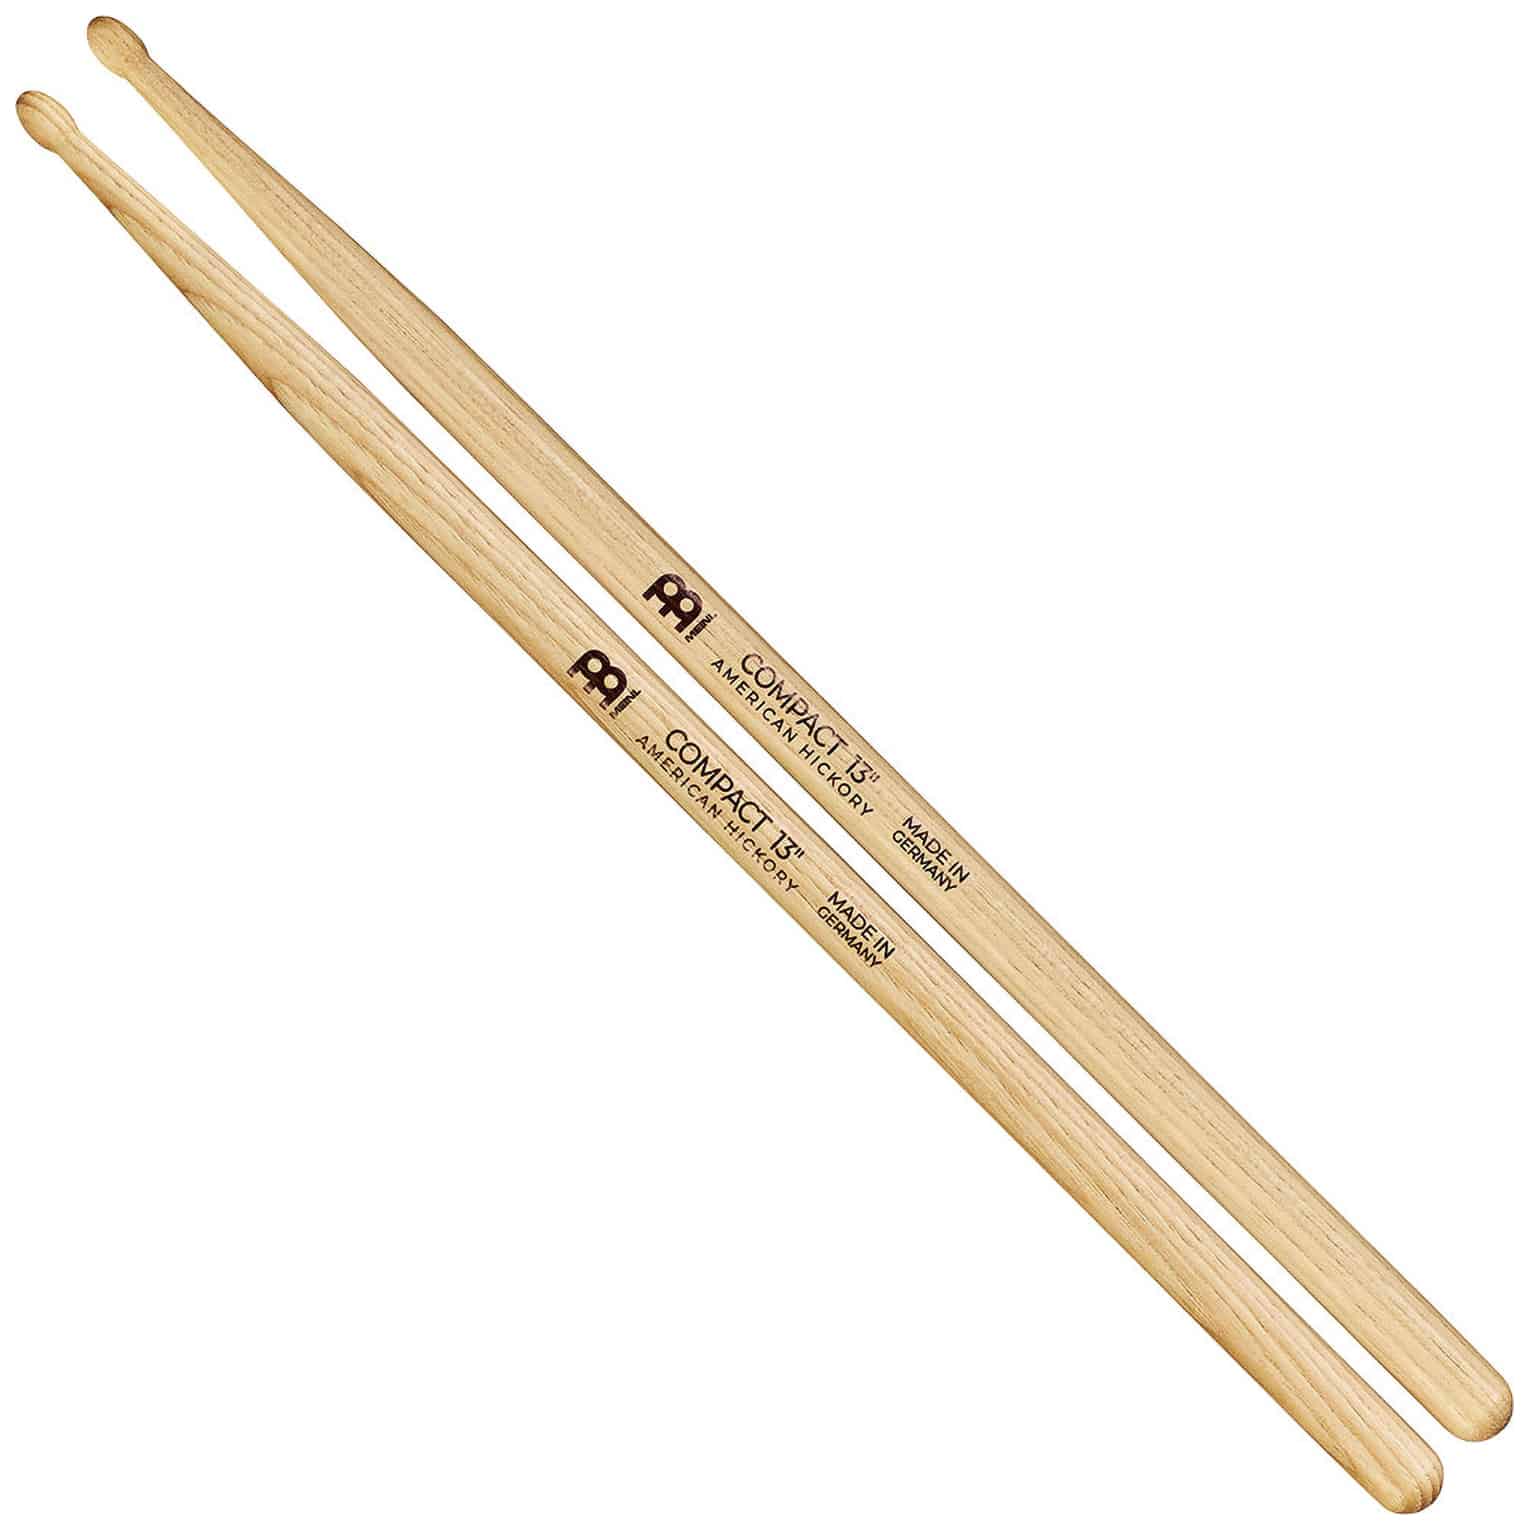 Meinl Stick & Brush Compact 13" Drumstick American Hickory